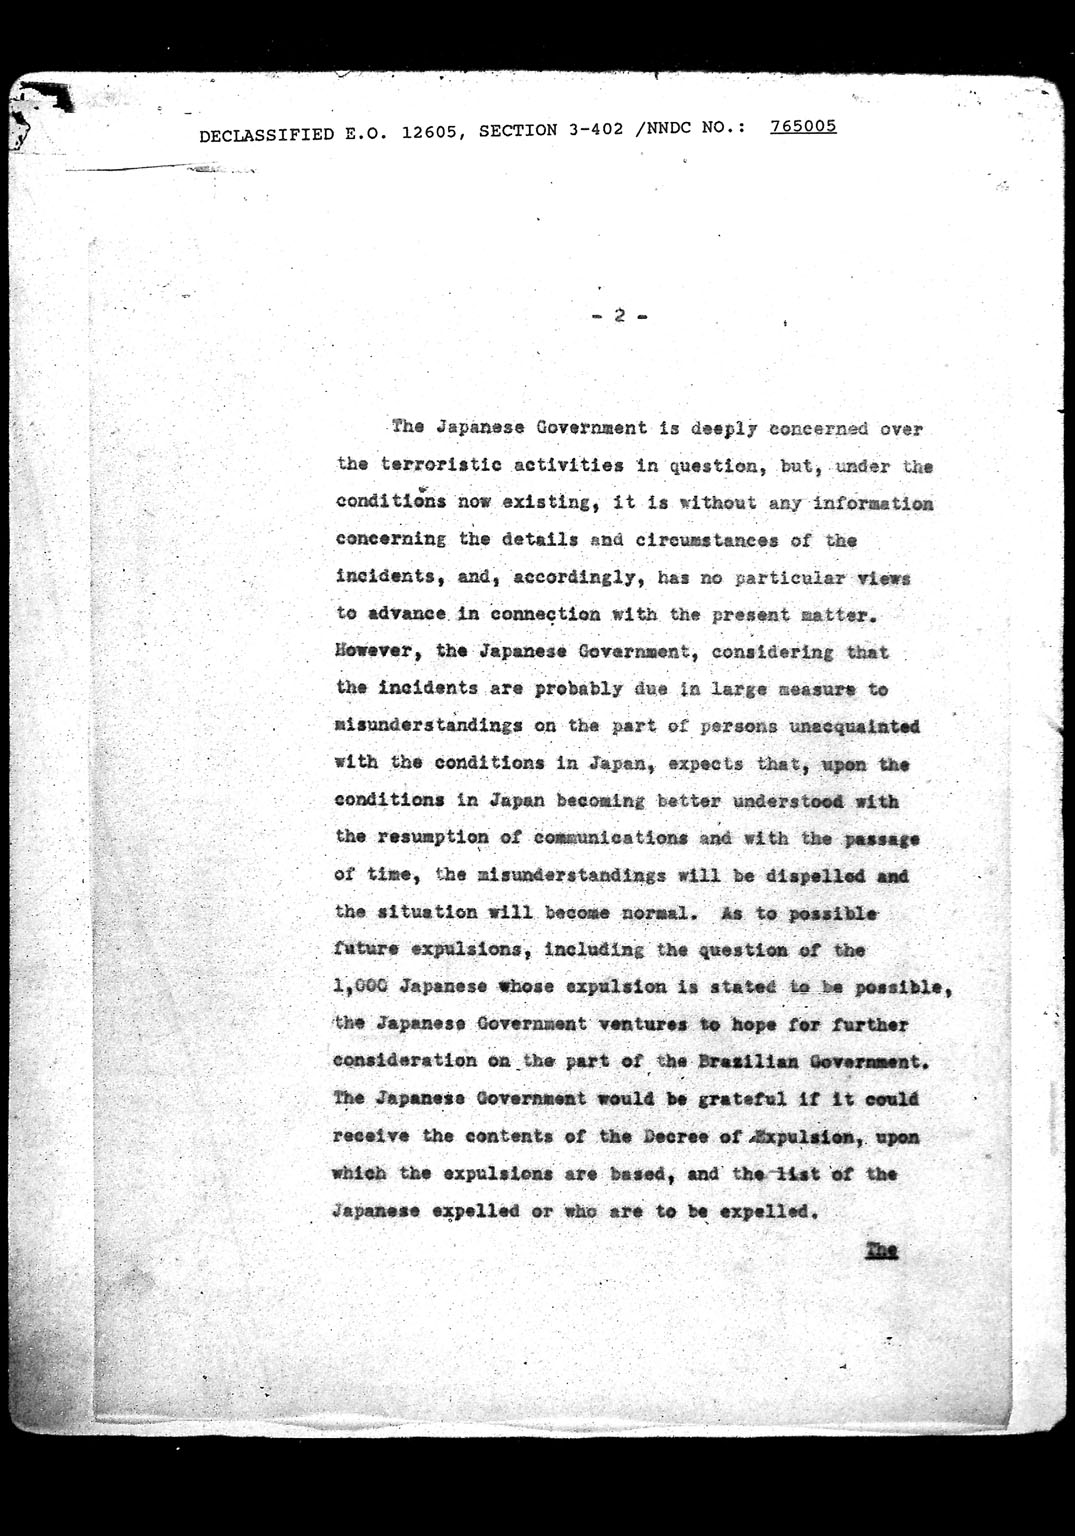 Image “Note Verbale on the expulsion of certain Japanese citizens in Brazil”